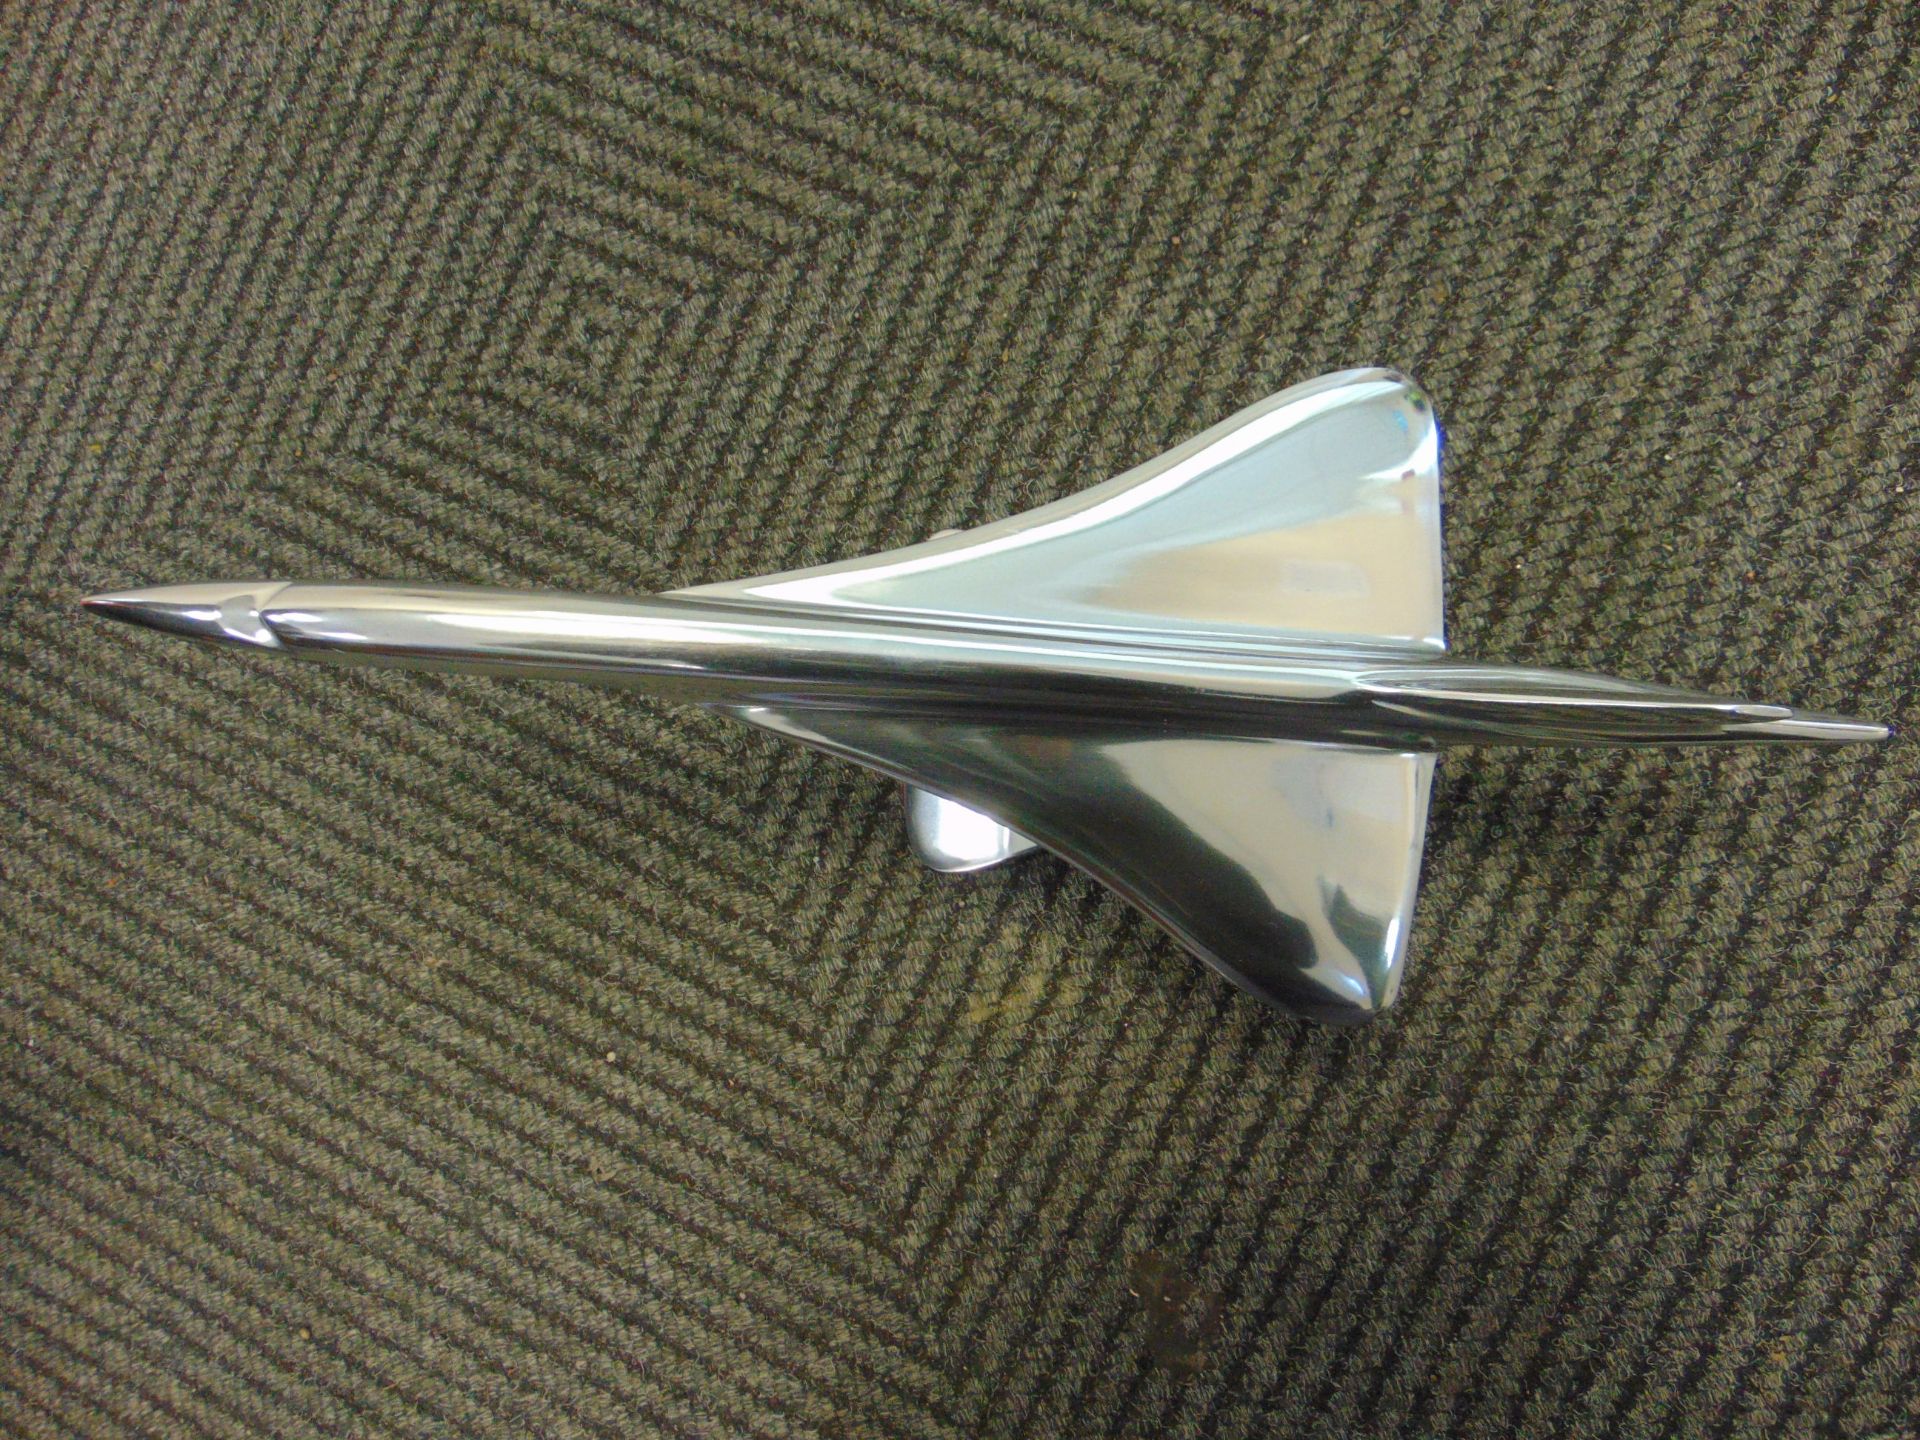 STUNNING POLISHED ALLUMINUM DESK TOP MODEL OF A CONCORD IN FLIGHT ON STAND - Image 11 of 12